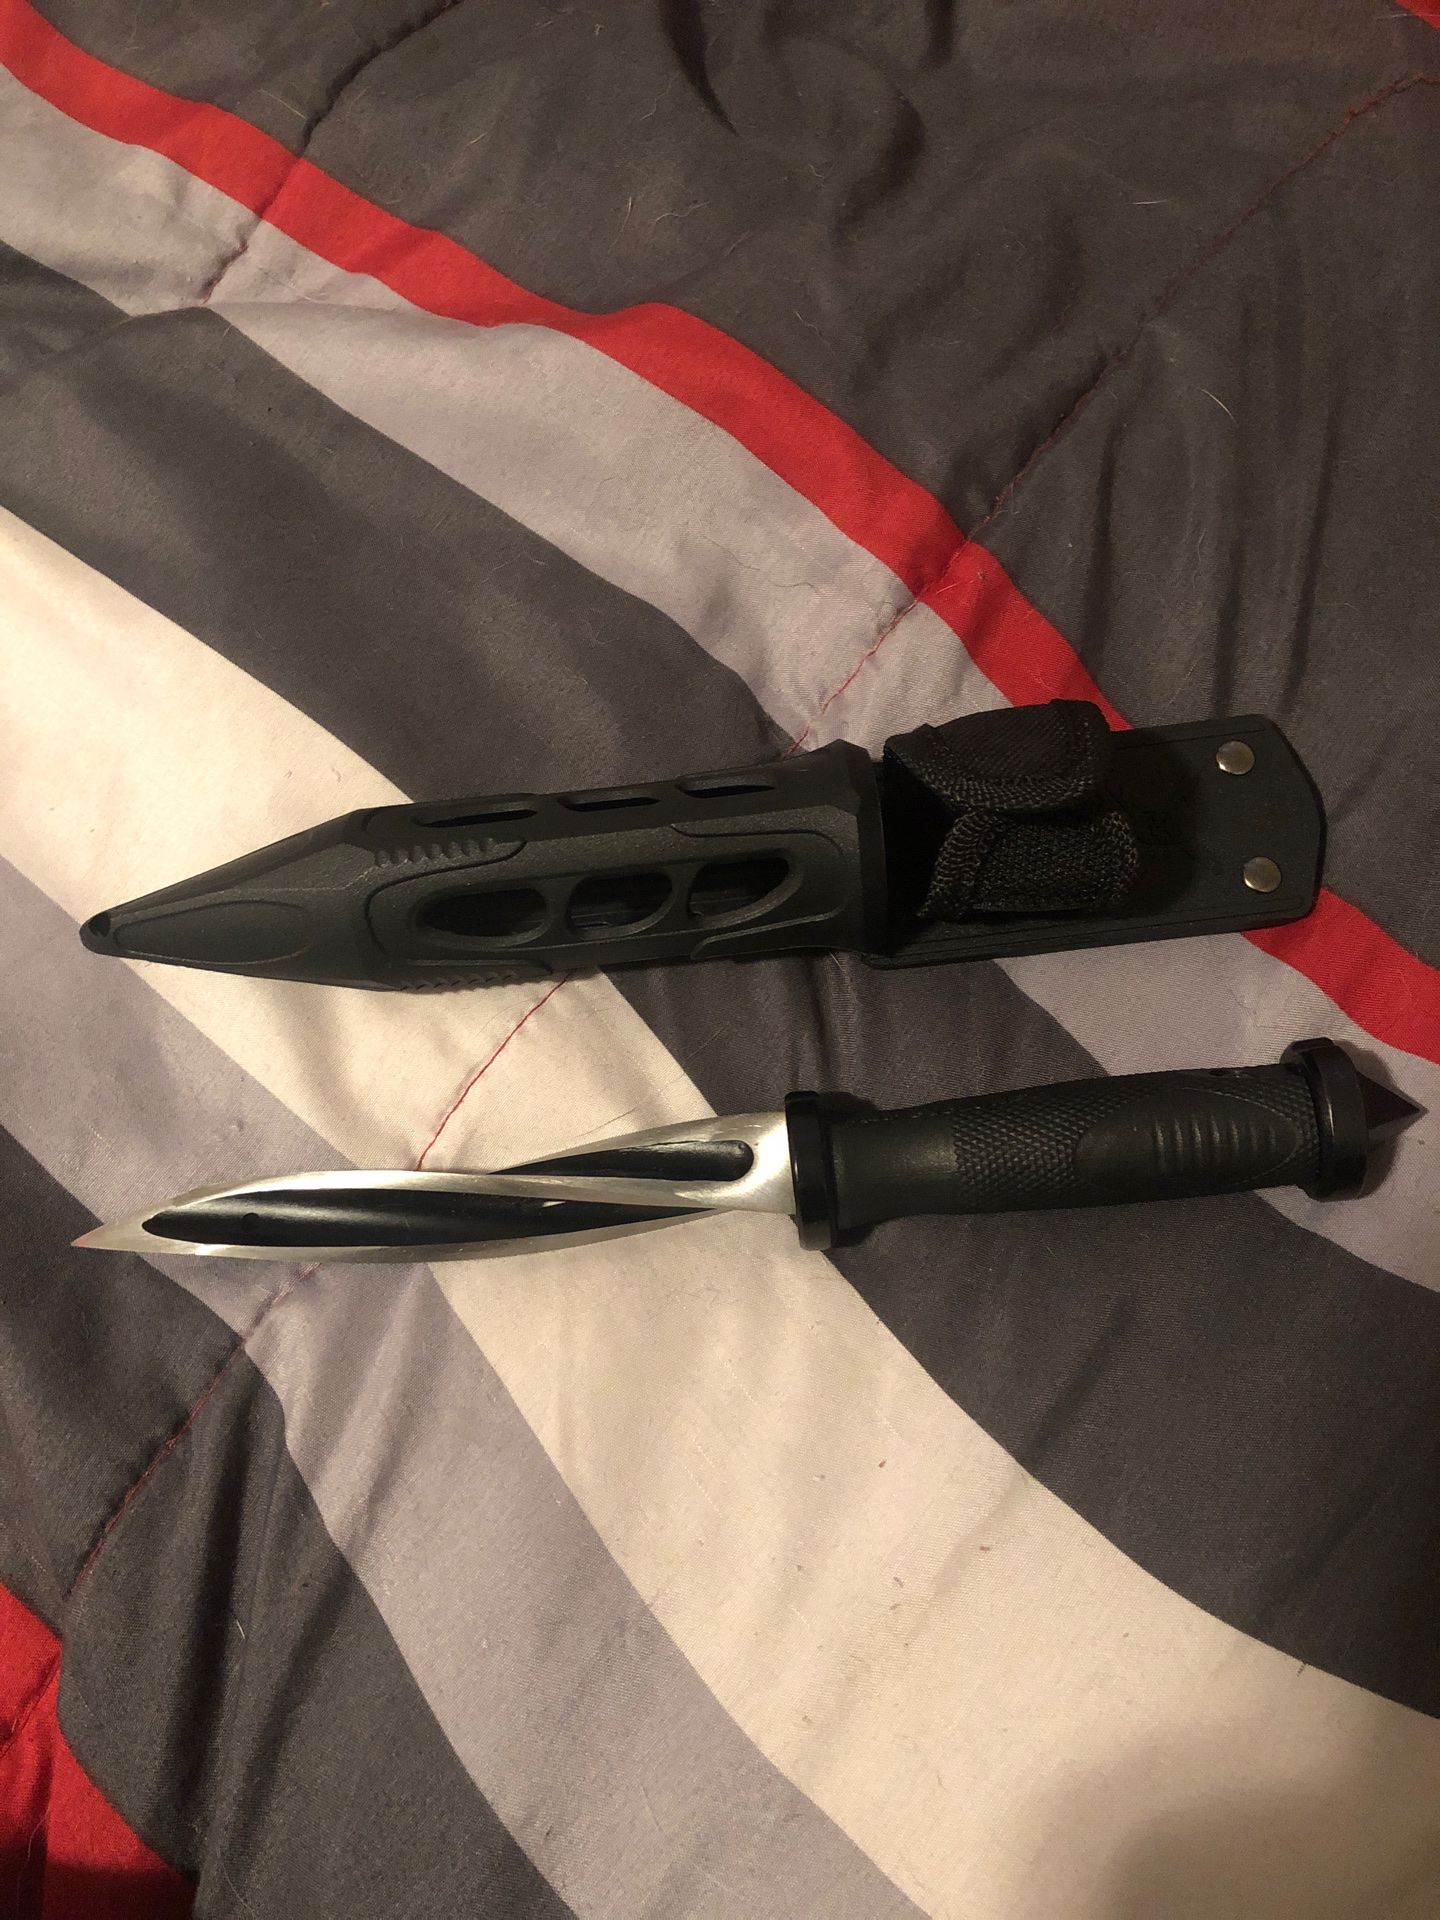 Tridagger for sale!